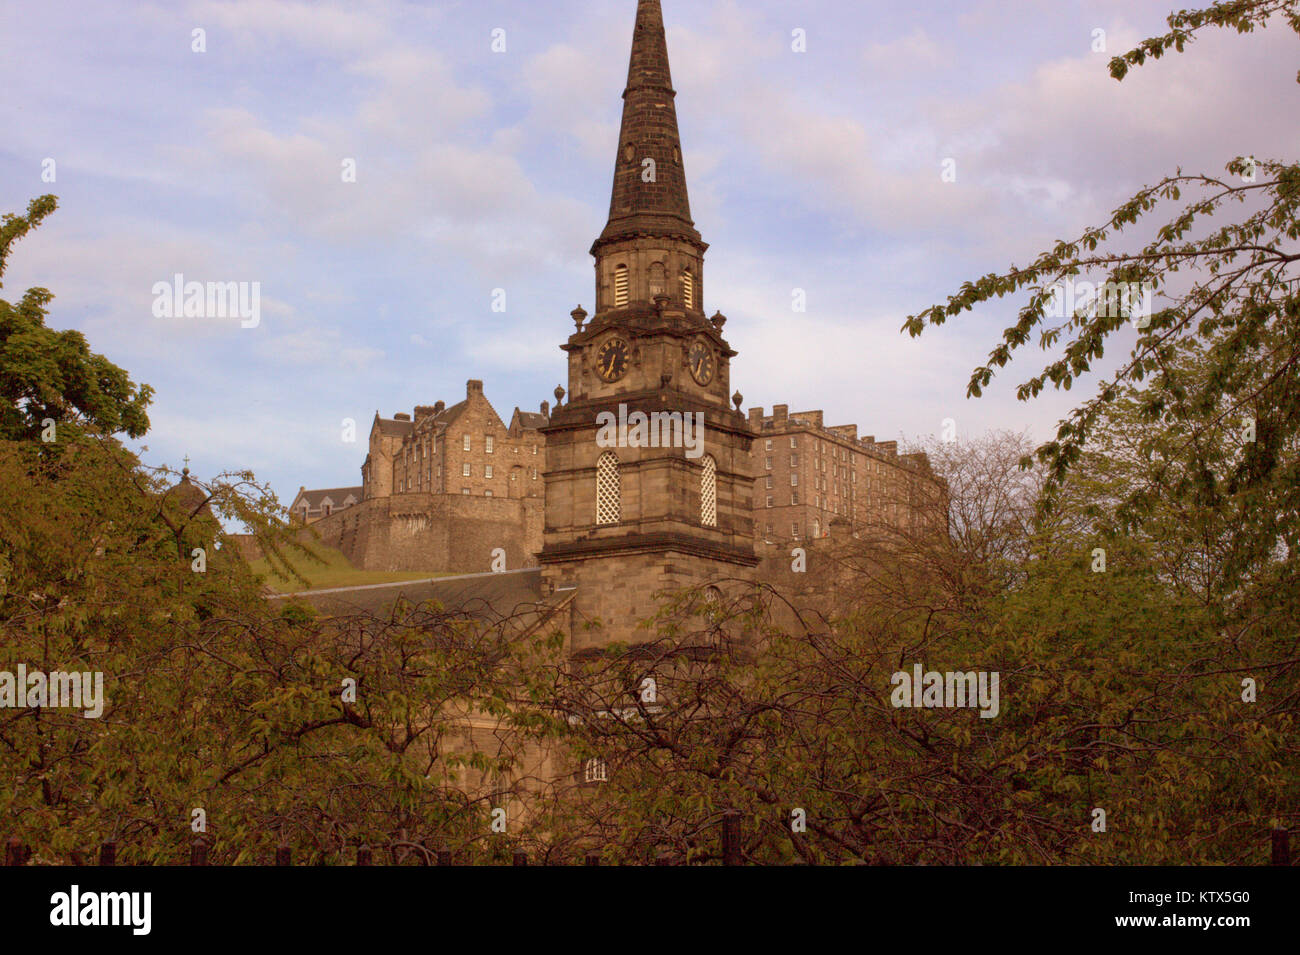 The  spire of the Parish Church of St Cuthbert, Lothian Road, Edinburgh, United Kingdom with the castle as a backdrop Stock Photo